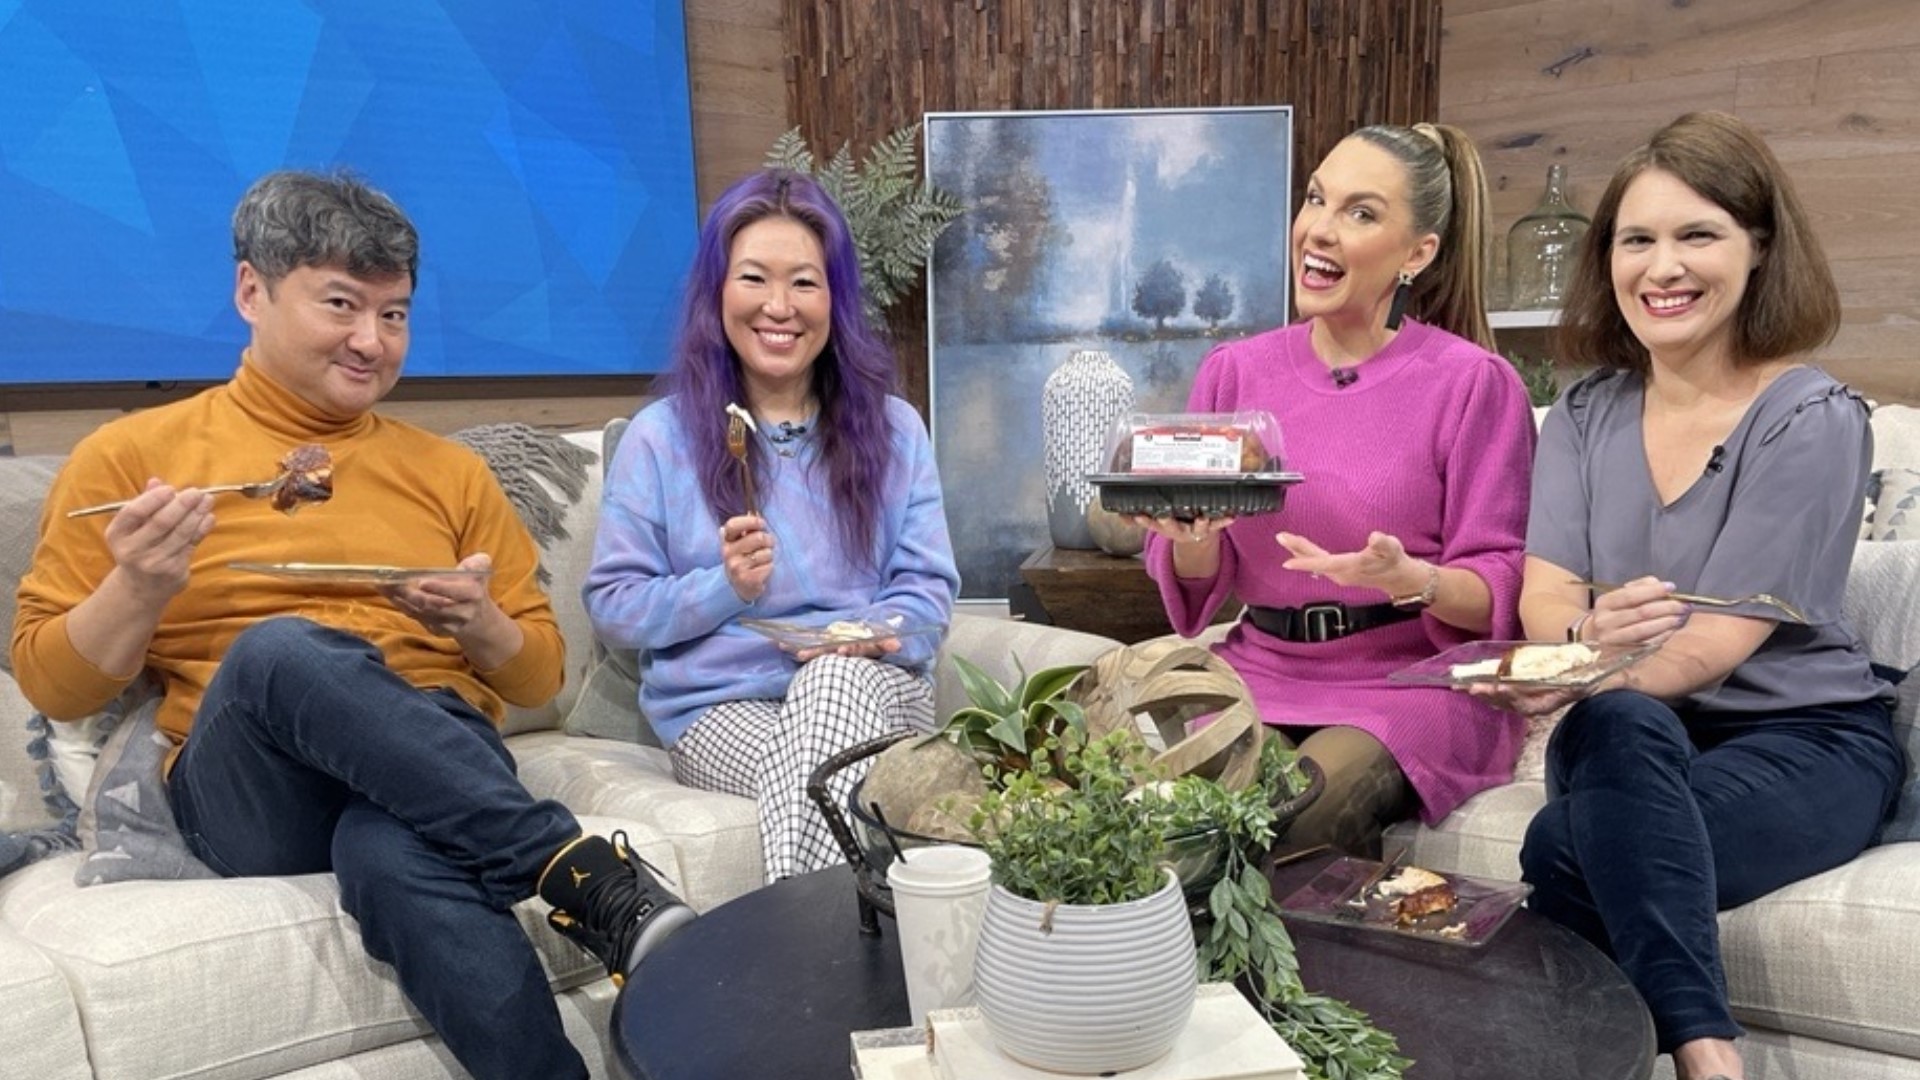 Seattle comedian Ellen Acuario, Seattle Times food and drink writer Tan Vinh, and New Day producer Rebecca Perry join Amity for a round of hot topics. #newdaynw